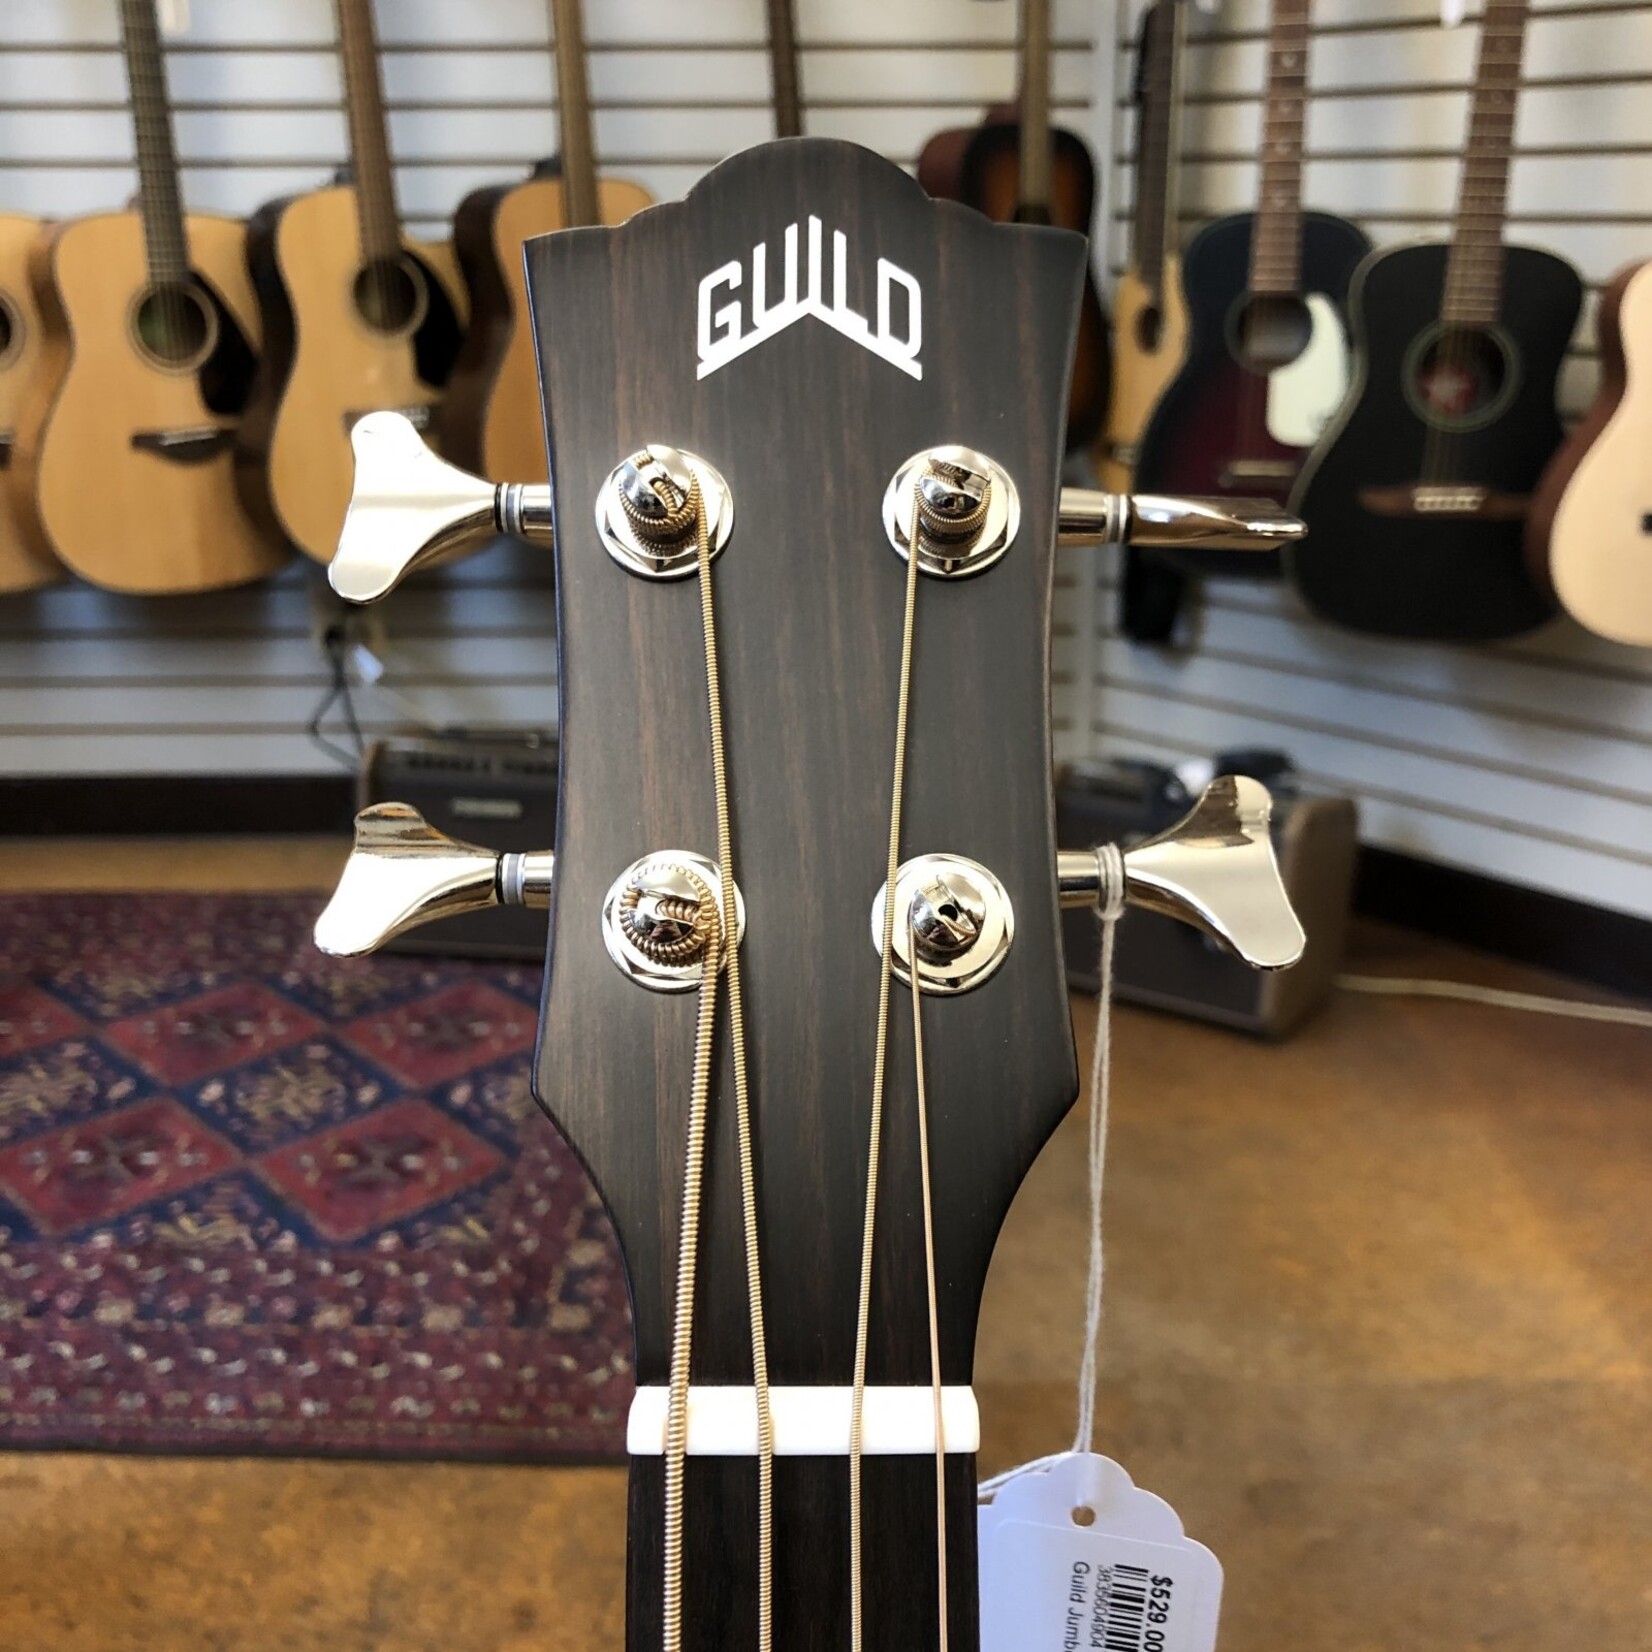 Guild Guild Jumbo Junior Bass Westerly Collection Sitka/Maple Acoustic-Electric Short Scale Bass